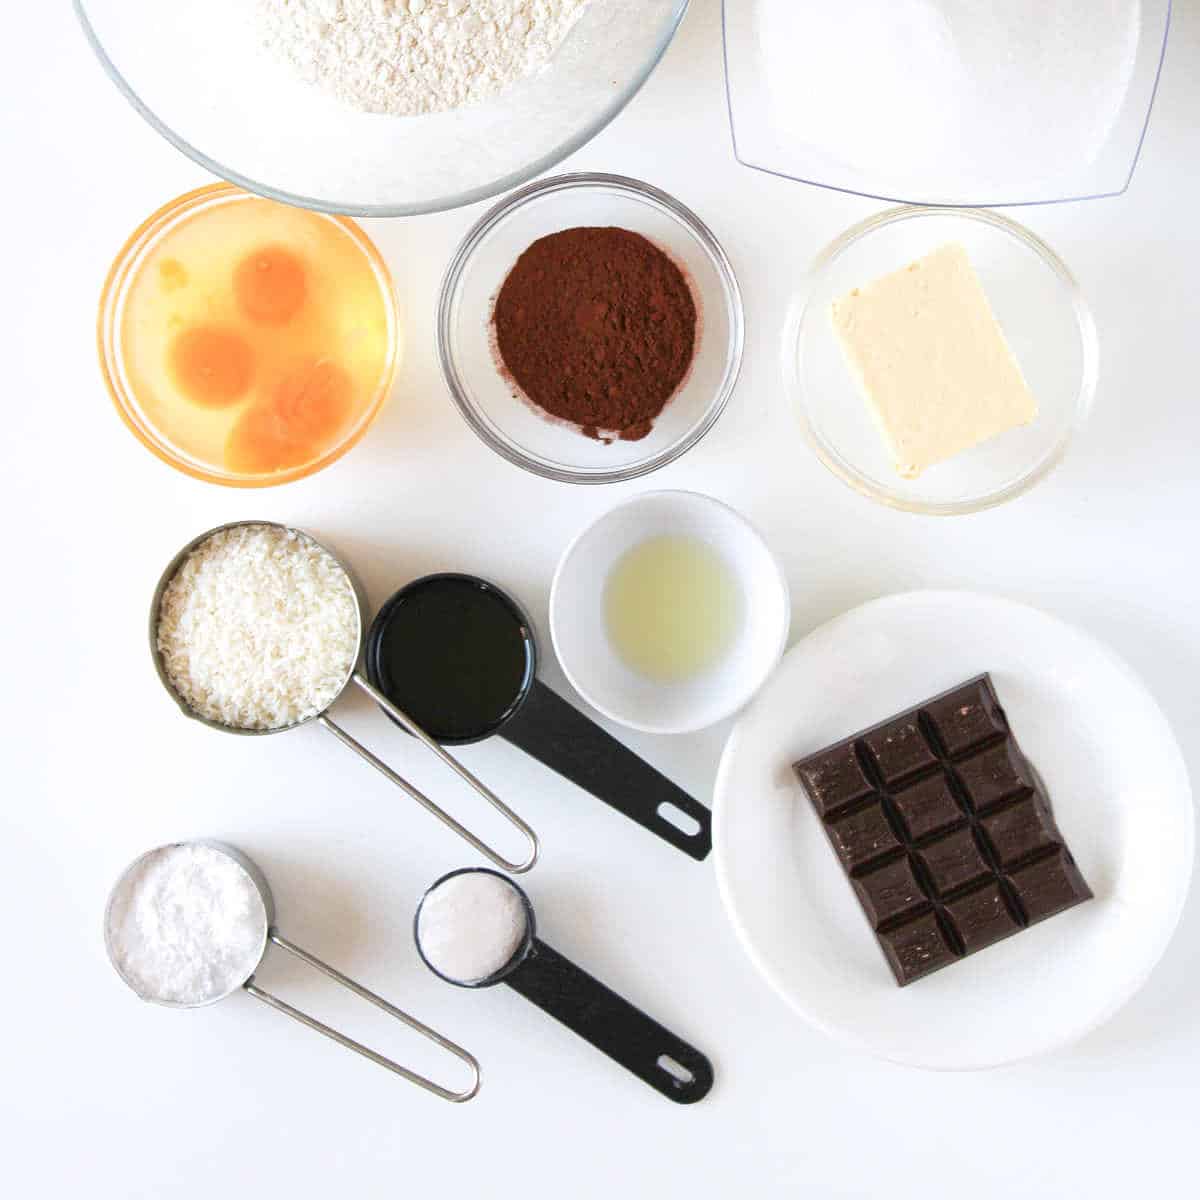 ingredients for making a marbled cake.